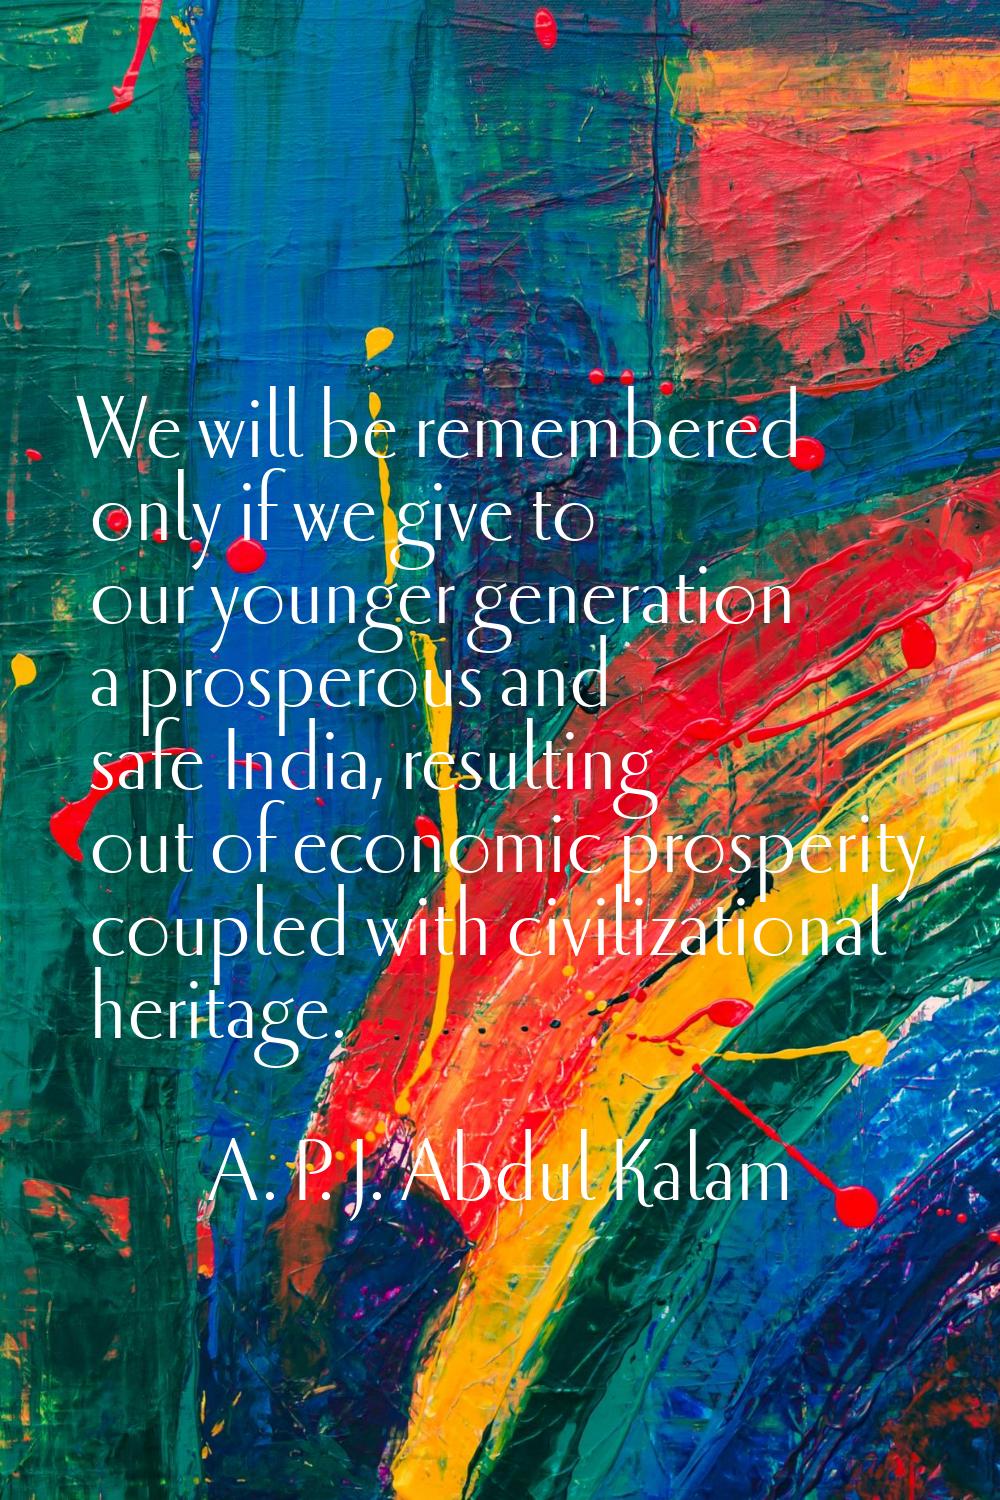 We will be remembered only if we give to our younger generation a prosperous and safe India, result